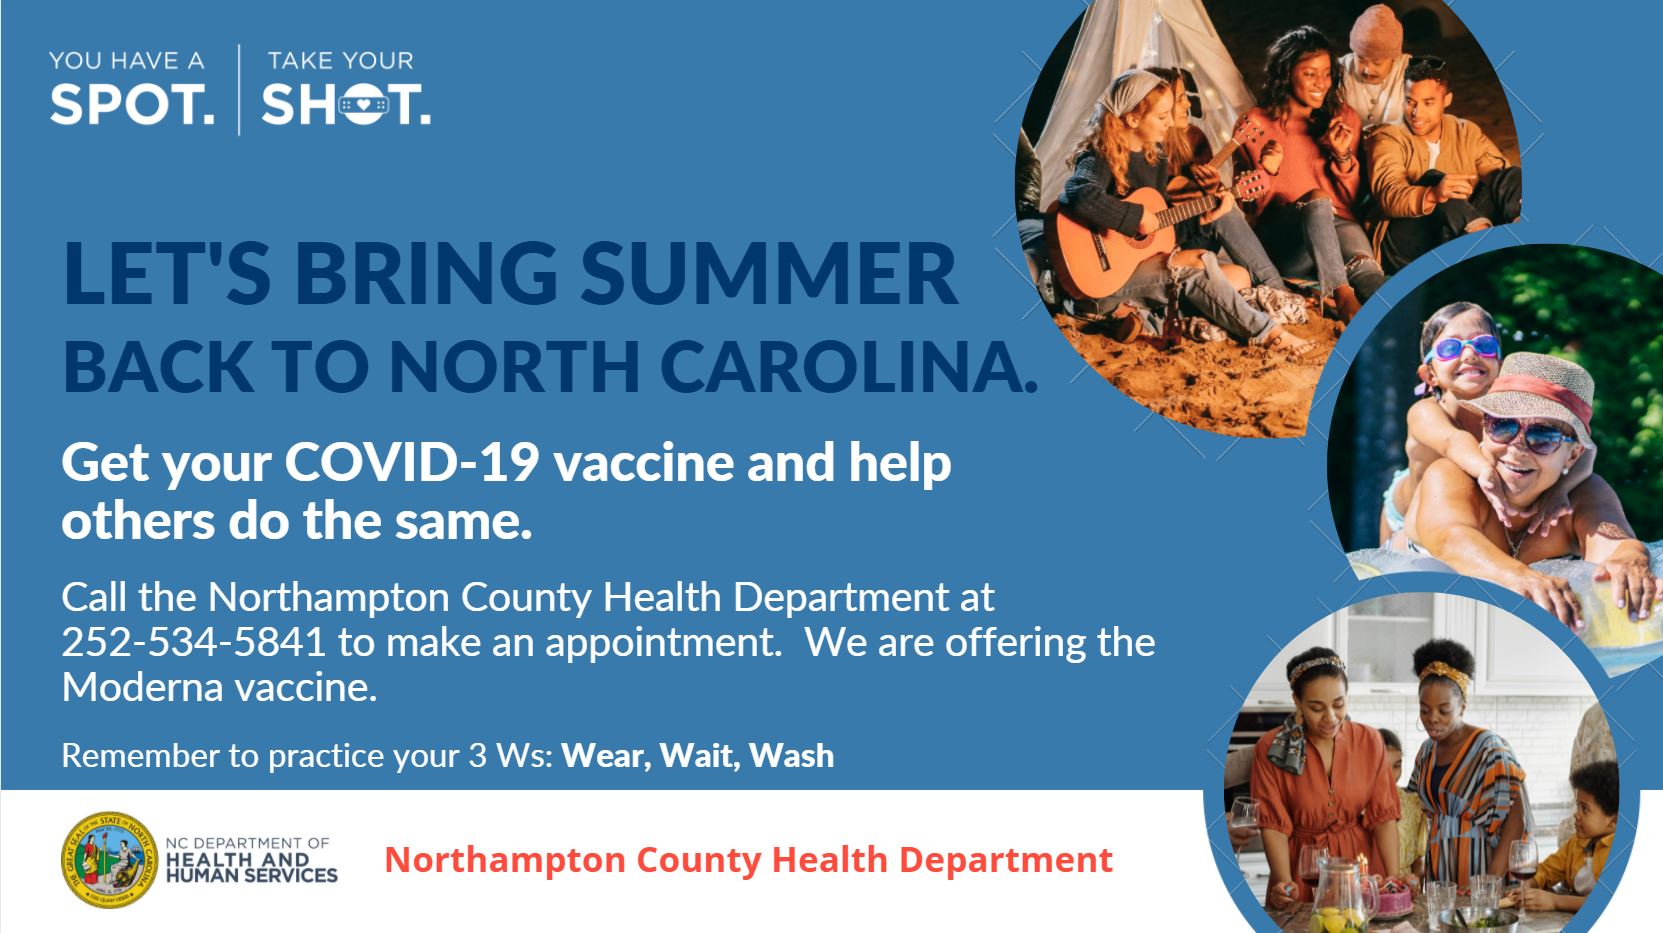 You have a spot, take your shot. Get your Covid-19 vaccine at NCHD.